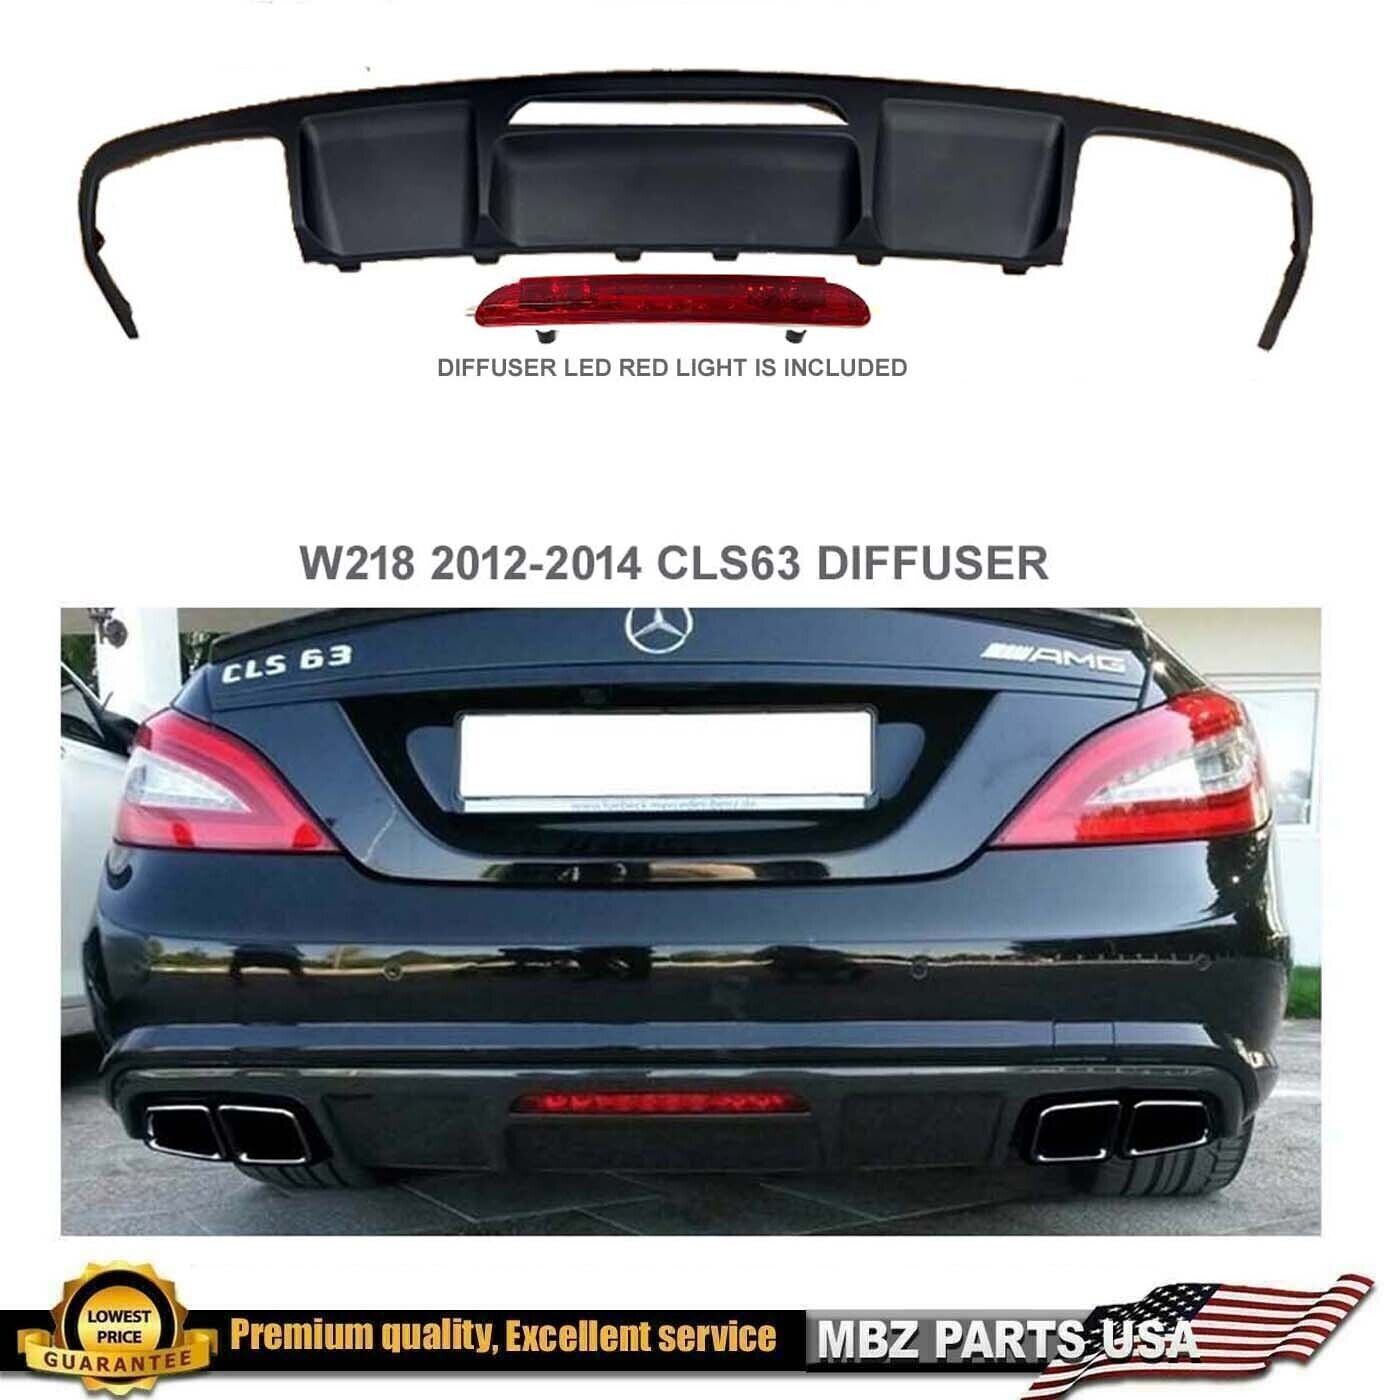 CLS63 AMG Diffuser Rear Bumper CLS550 2012 2013 2014 CLS63 CL600+ Red Led Light